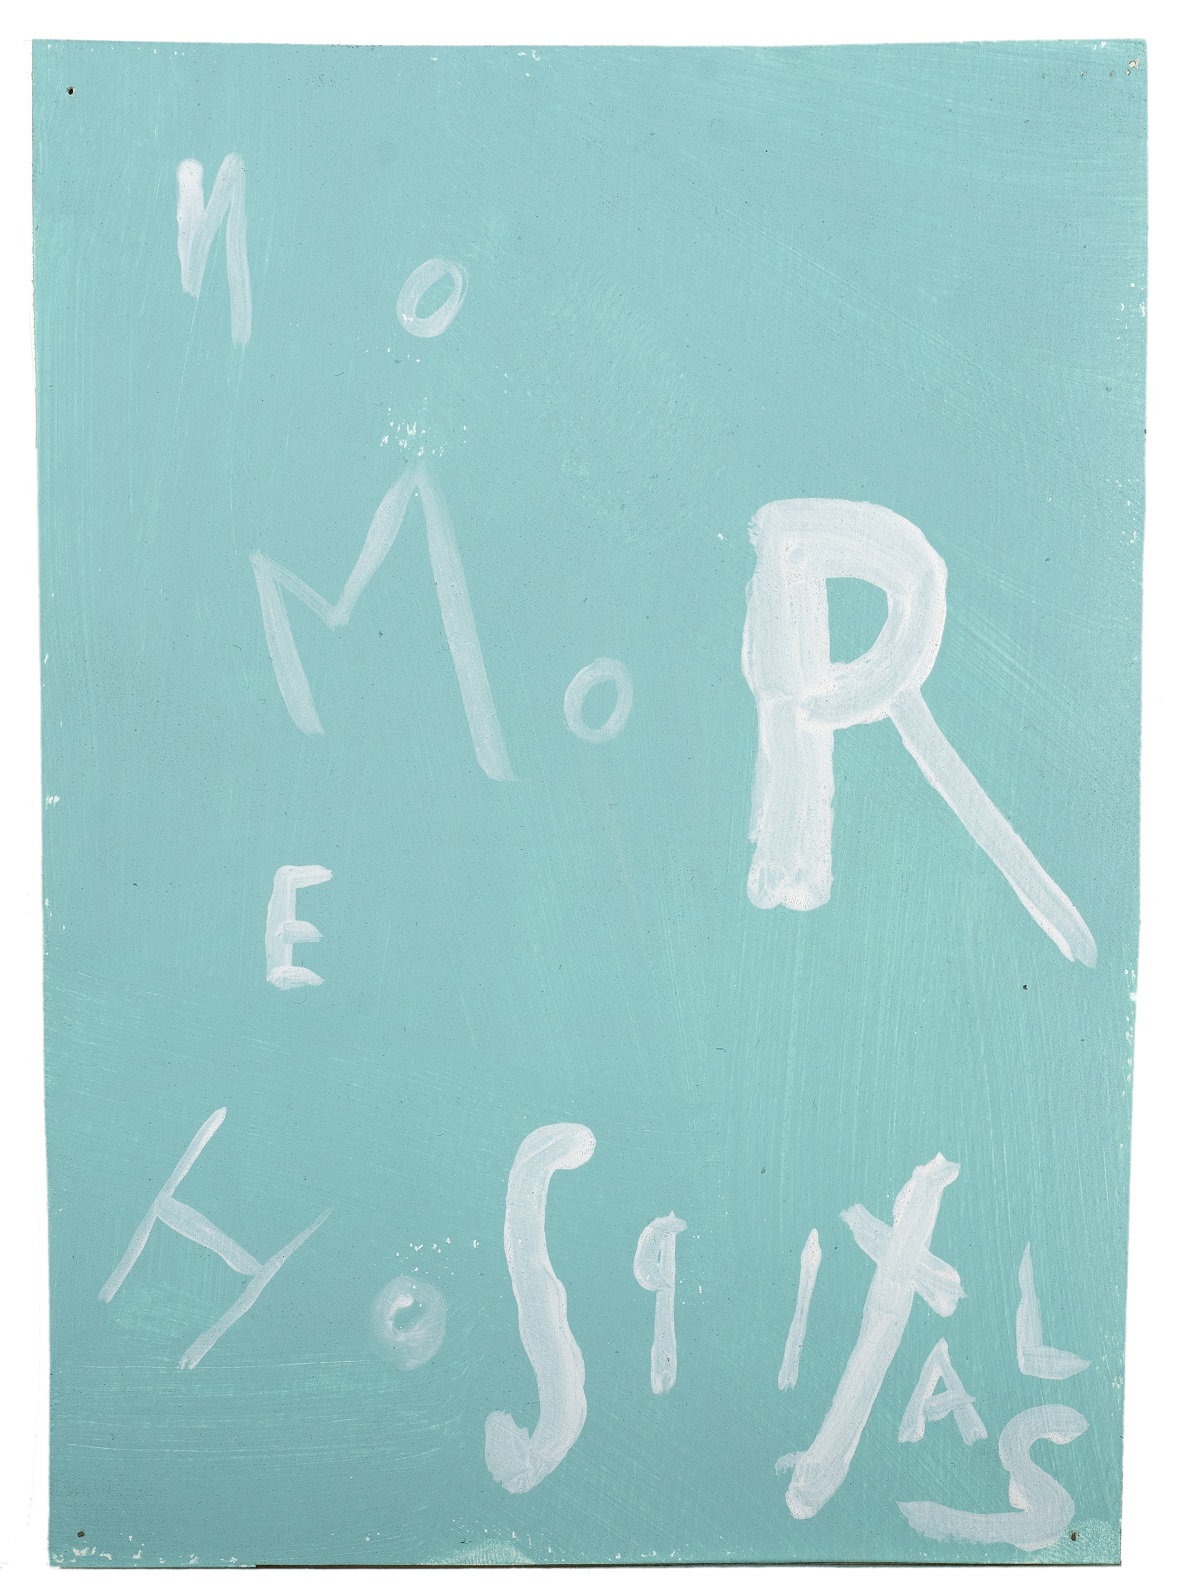 Giovanni Intra, No More Hospitals, 1995, acrylic on paper, Collection Dunedin Public Art Gallery,...